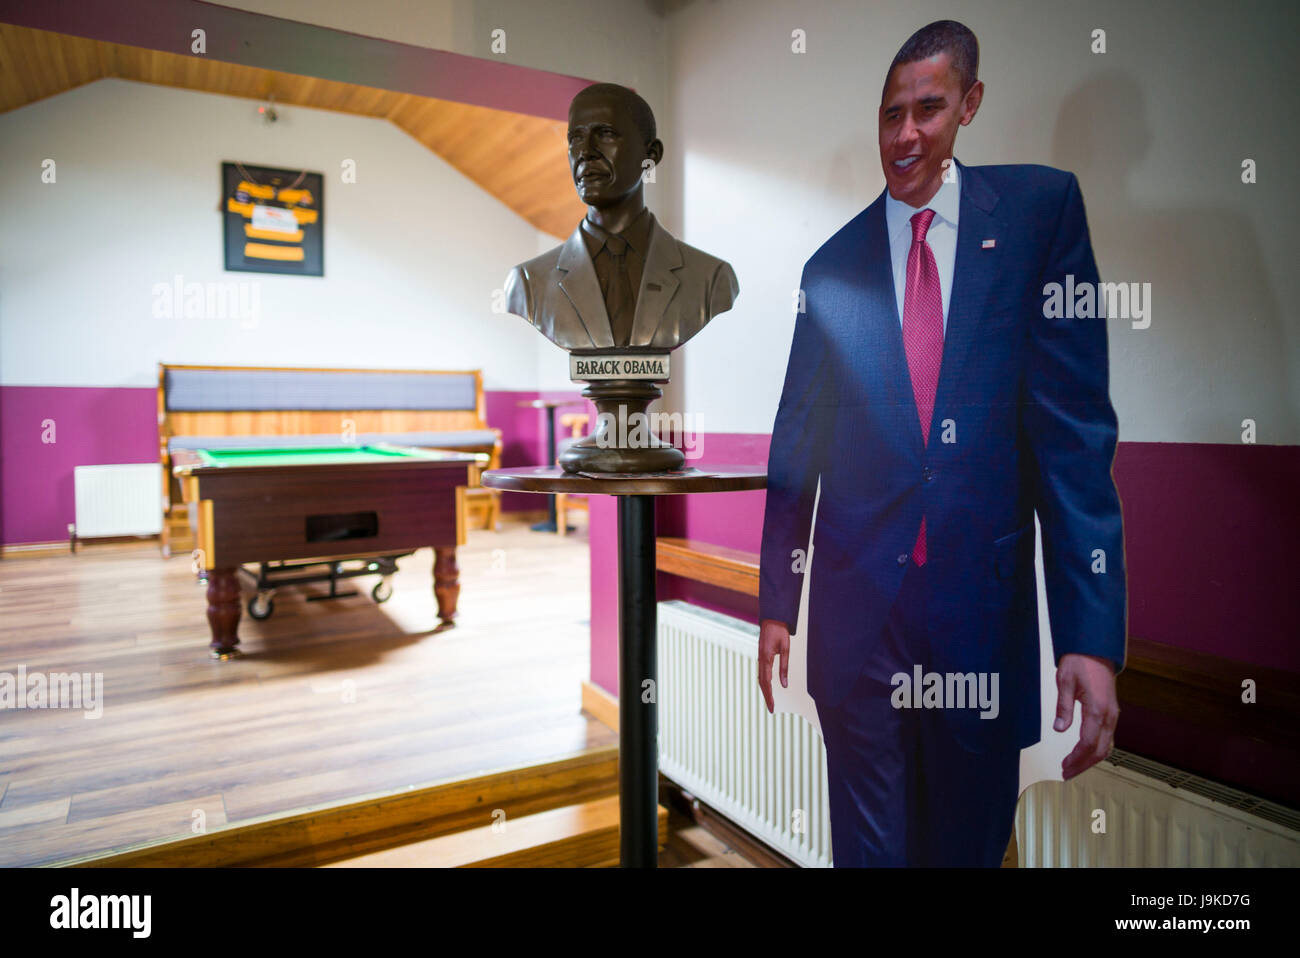 Ireland, County Offaly, Moneygall, Hayes' Bar and Pub, site of US President Barack Obama's visit, interior with bust and life size portrait of President Obama Stock Photo